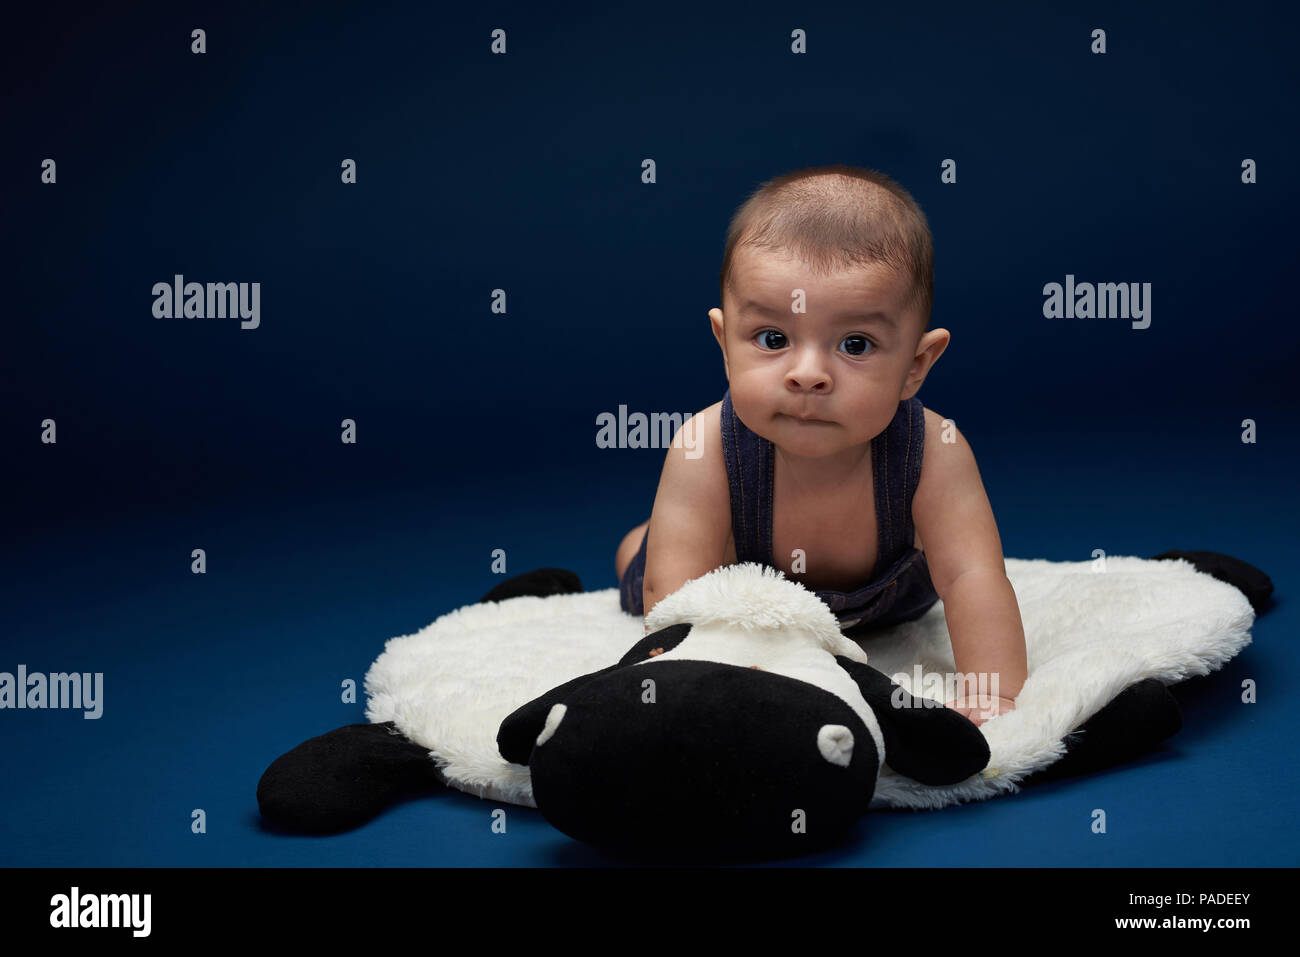 Hispanic baby boy in blue studio background with copy space Stock Photo